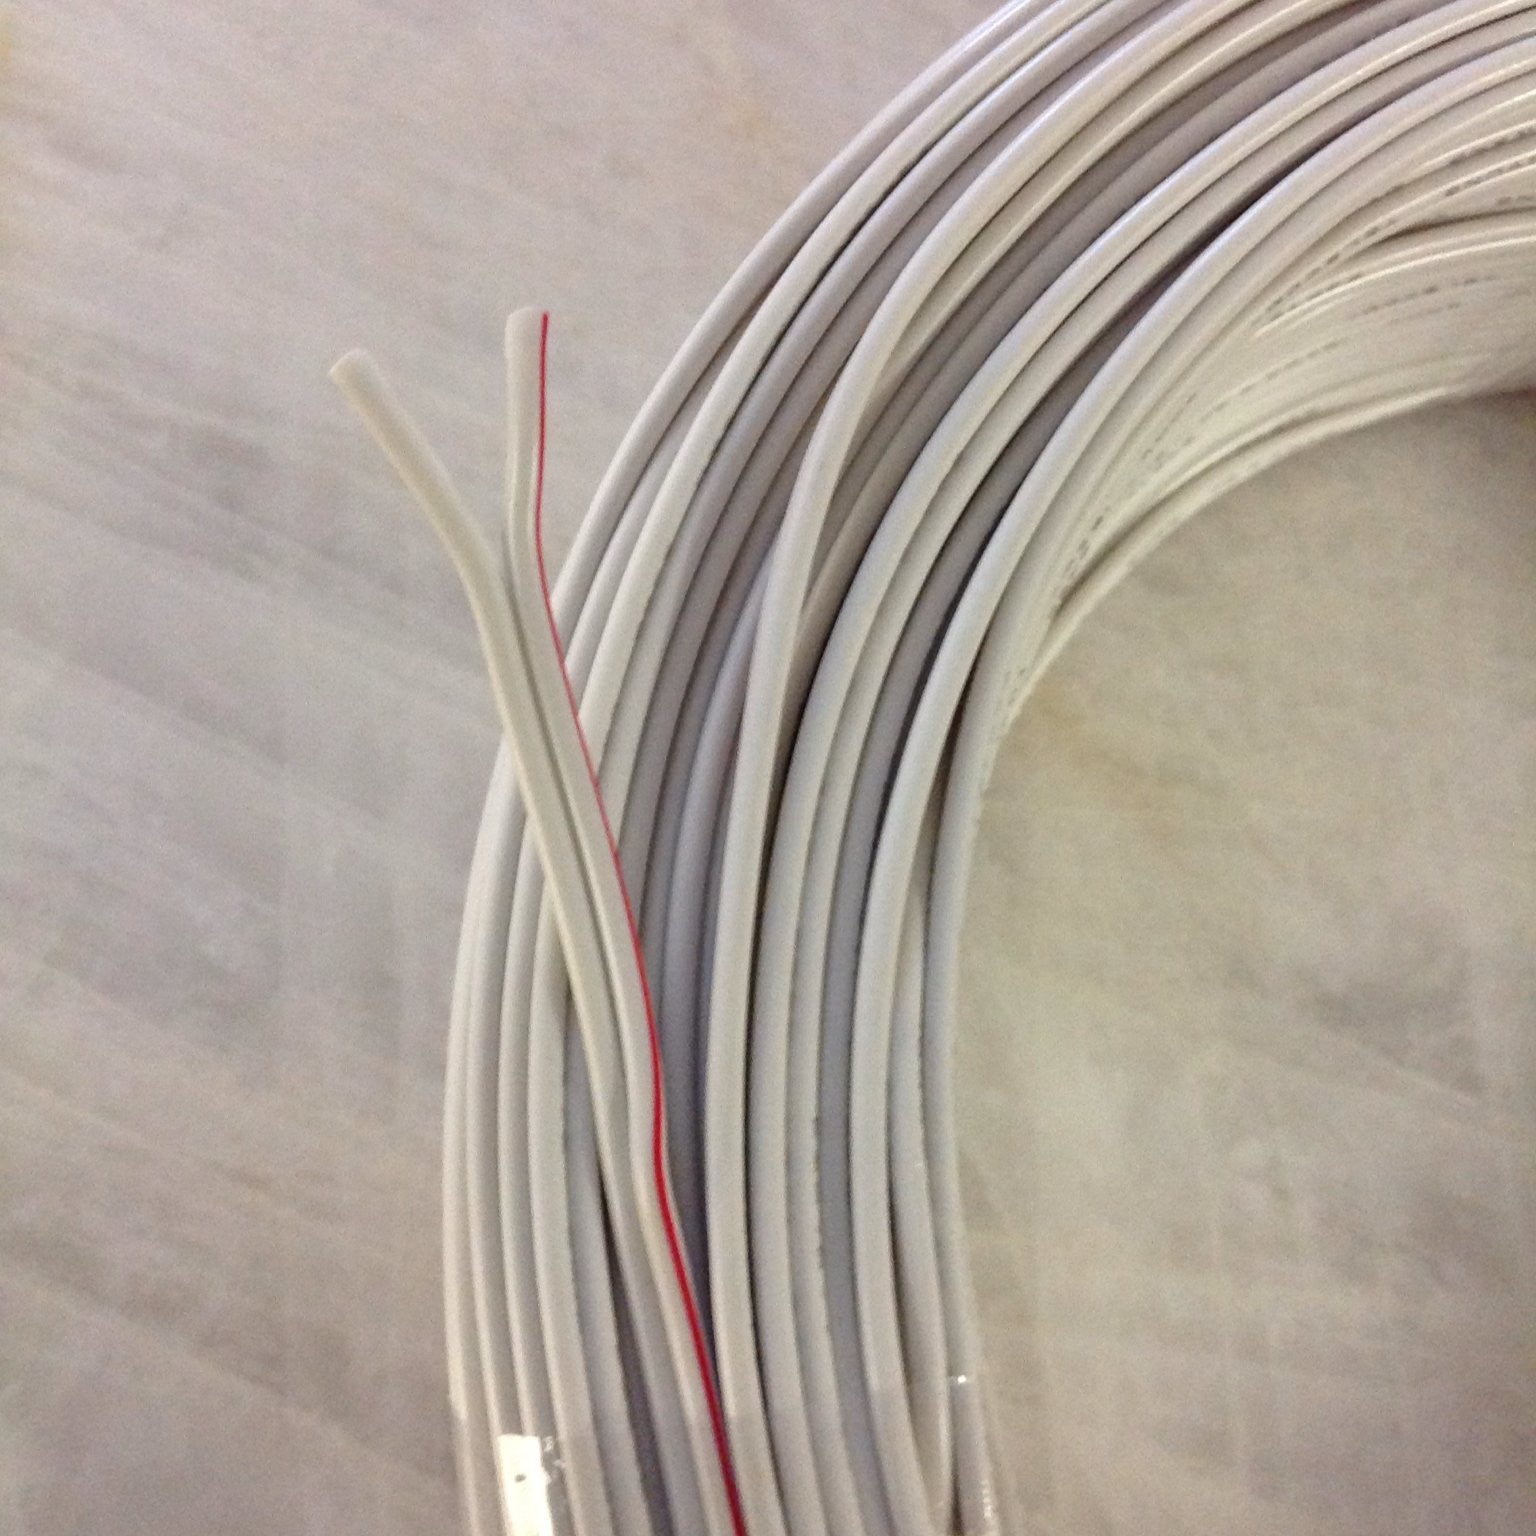 UL 2-Core 18 AWG PVC Coated Wire